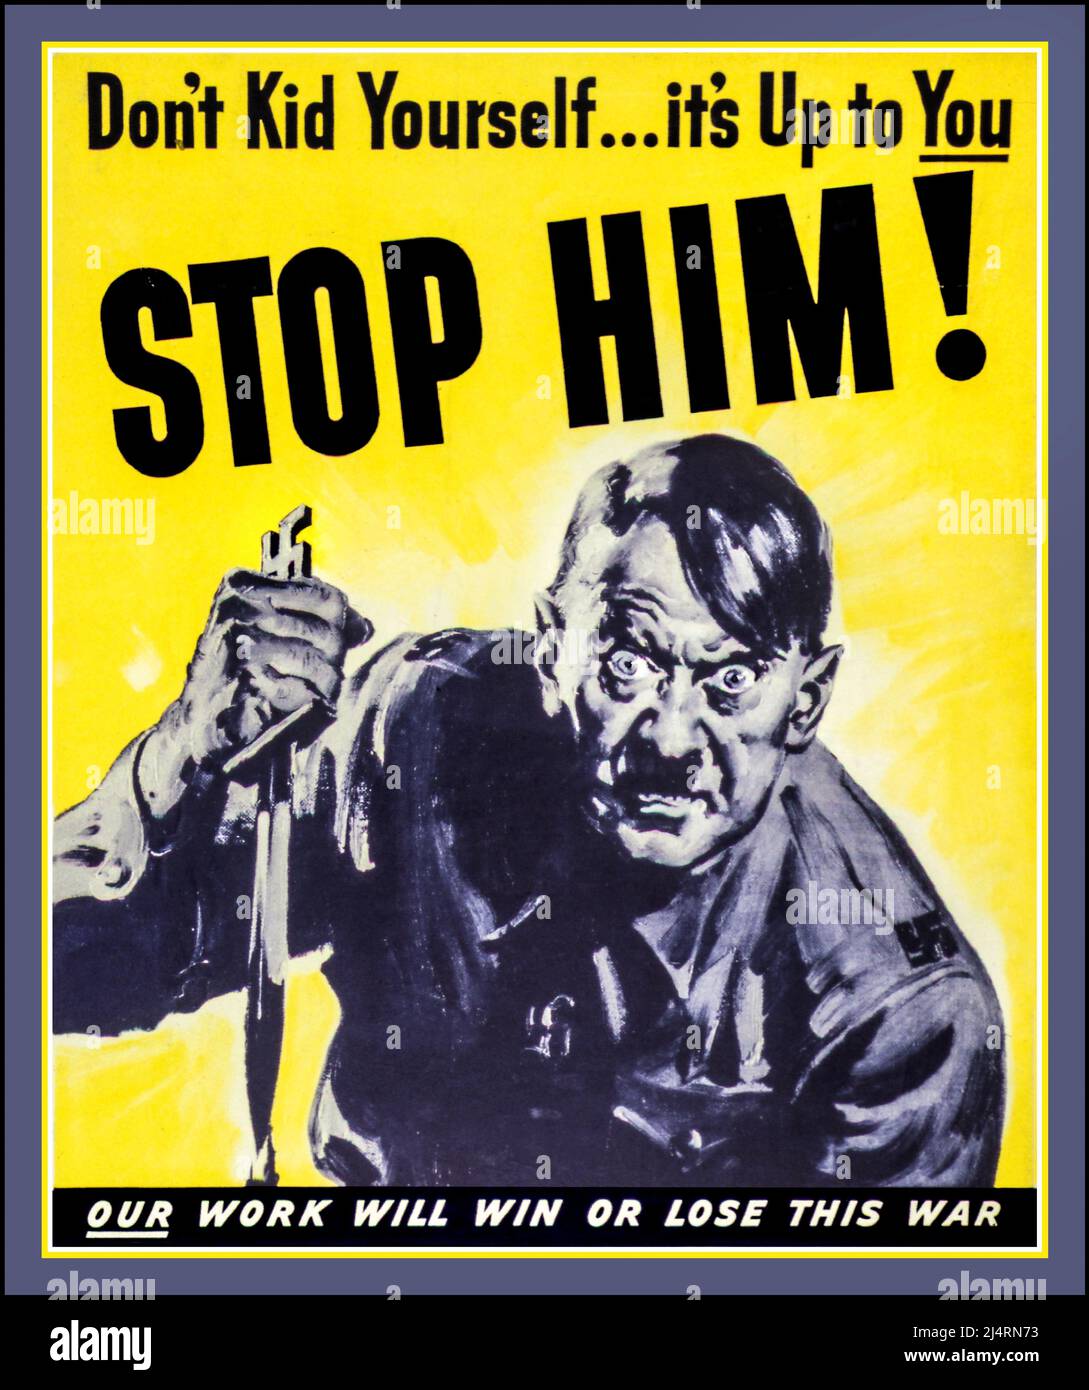 WW2 ADOLF HITLER POSTER ‘STOP HIM’ Hitler in demonic rage with bloodstained dagger WWII Propaganda Poster Anti-Nazi Germany “Don't Kid Yourself...it's Up to You...Stop Him!” ‘Our work will win or lose this war’ 1943 World War 2 Second World War. American Anti Nazi Propaganda Poster Stock Photo